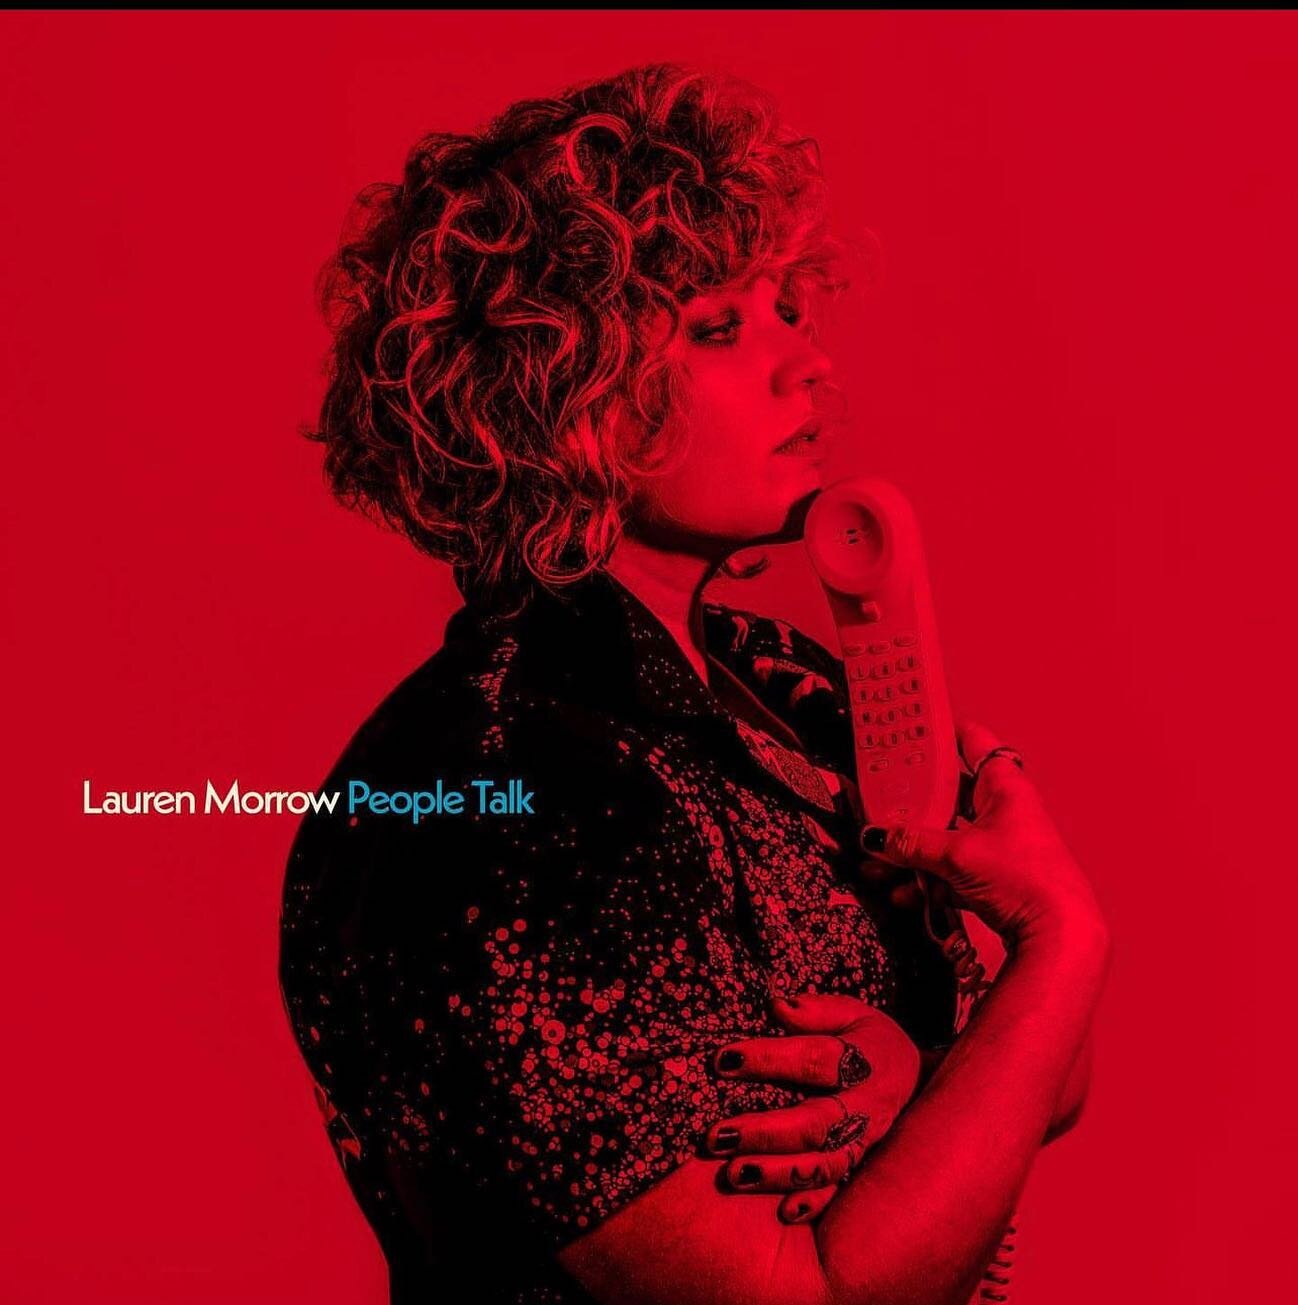 So proud of my images for the new @thisislaurenmorrow record. I&rsquo;ve listened to the record so many times and absolutely recommend picking up a copy as soon as you can! Her song writing is incredible, her story telling relatable, and the producti